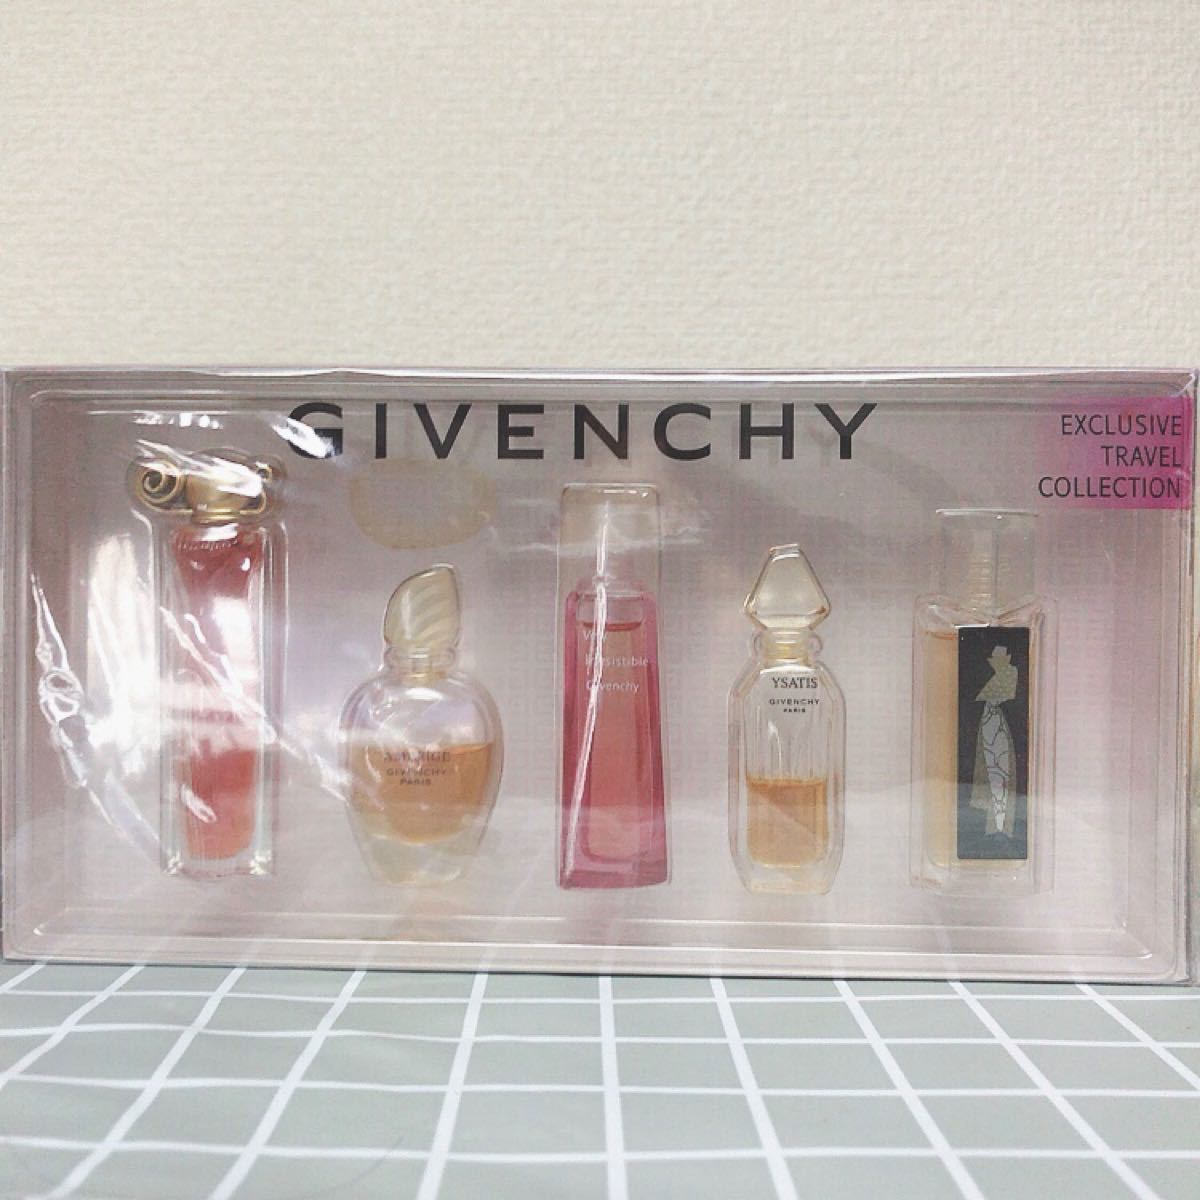 GIVENCHY ジバンシー セット ミニ香水 注目の福袋！ ミニ香水